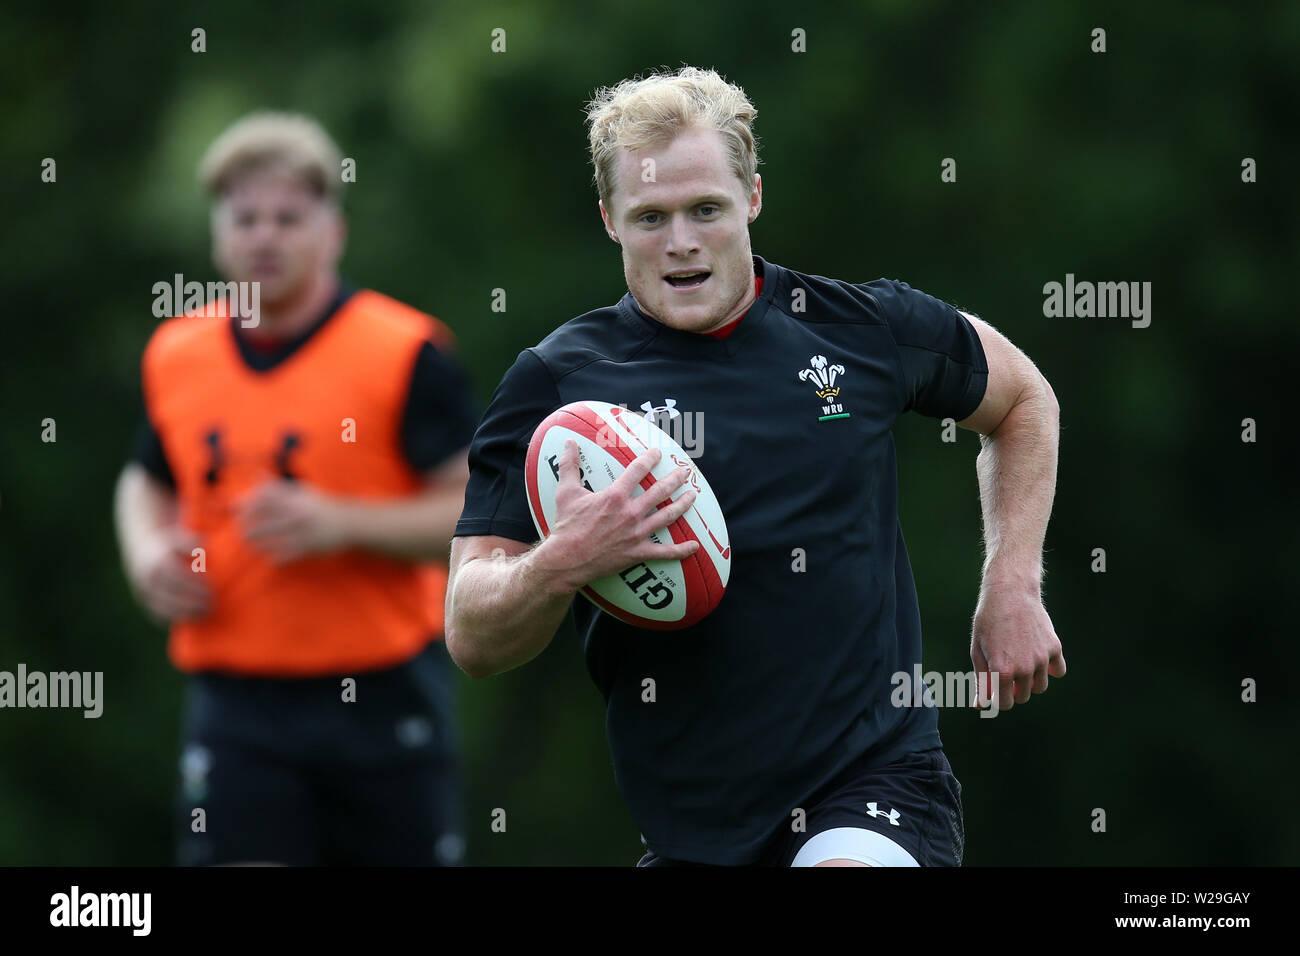 Cardiff, UK. 06th July, 2019. Aled Davies of Wales. Wales rugby team training session at the Vale Resort, Hensol, near Cardiff, South Wales on Saturday 6th July 2019. the squad are preparing for the Rugby World Cup 2019 this Autumn pic by Credit: Andrew Orchard/Alamy Live News Stock Photo